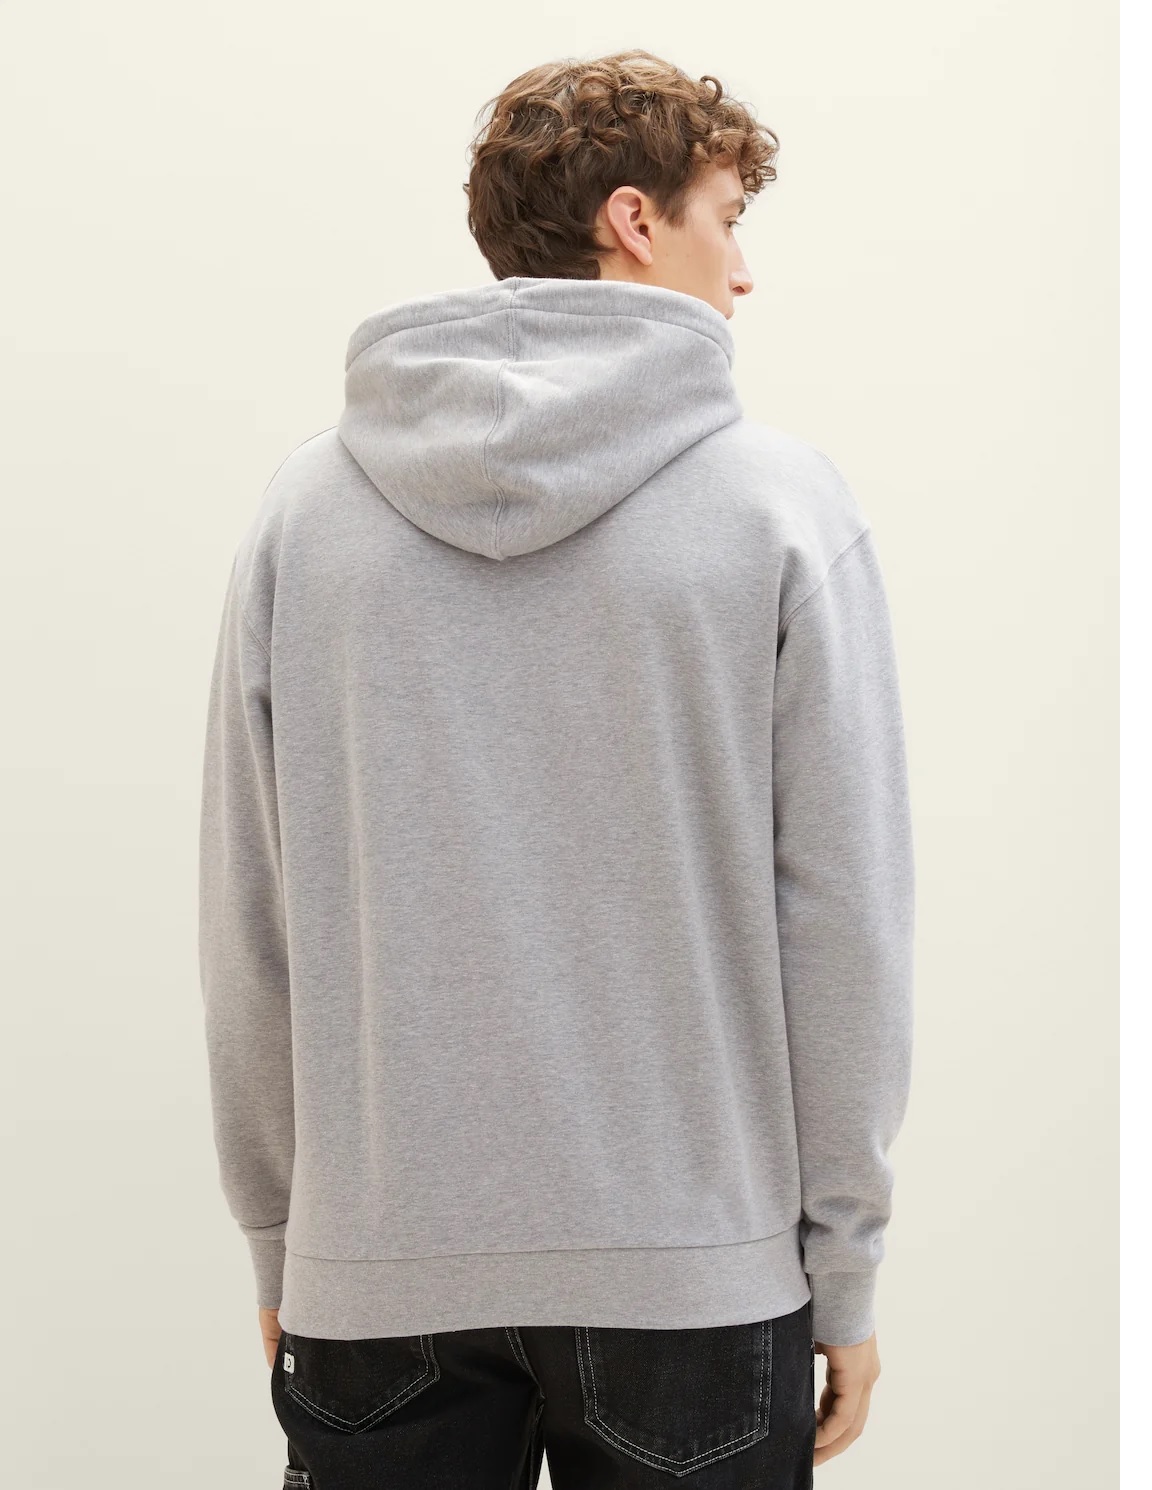 TomTailor 309 Hoodie - Photo 3